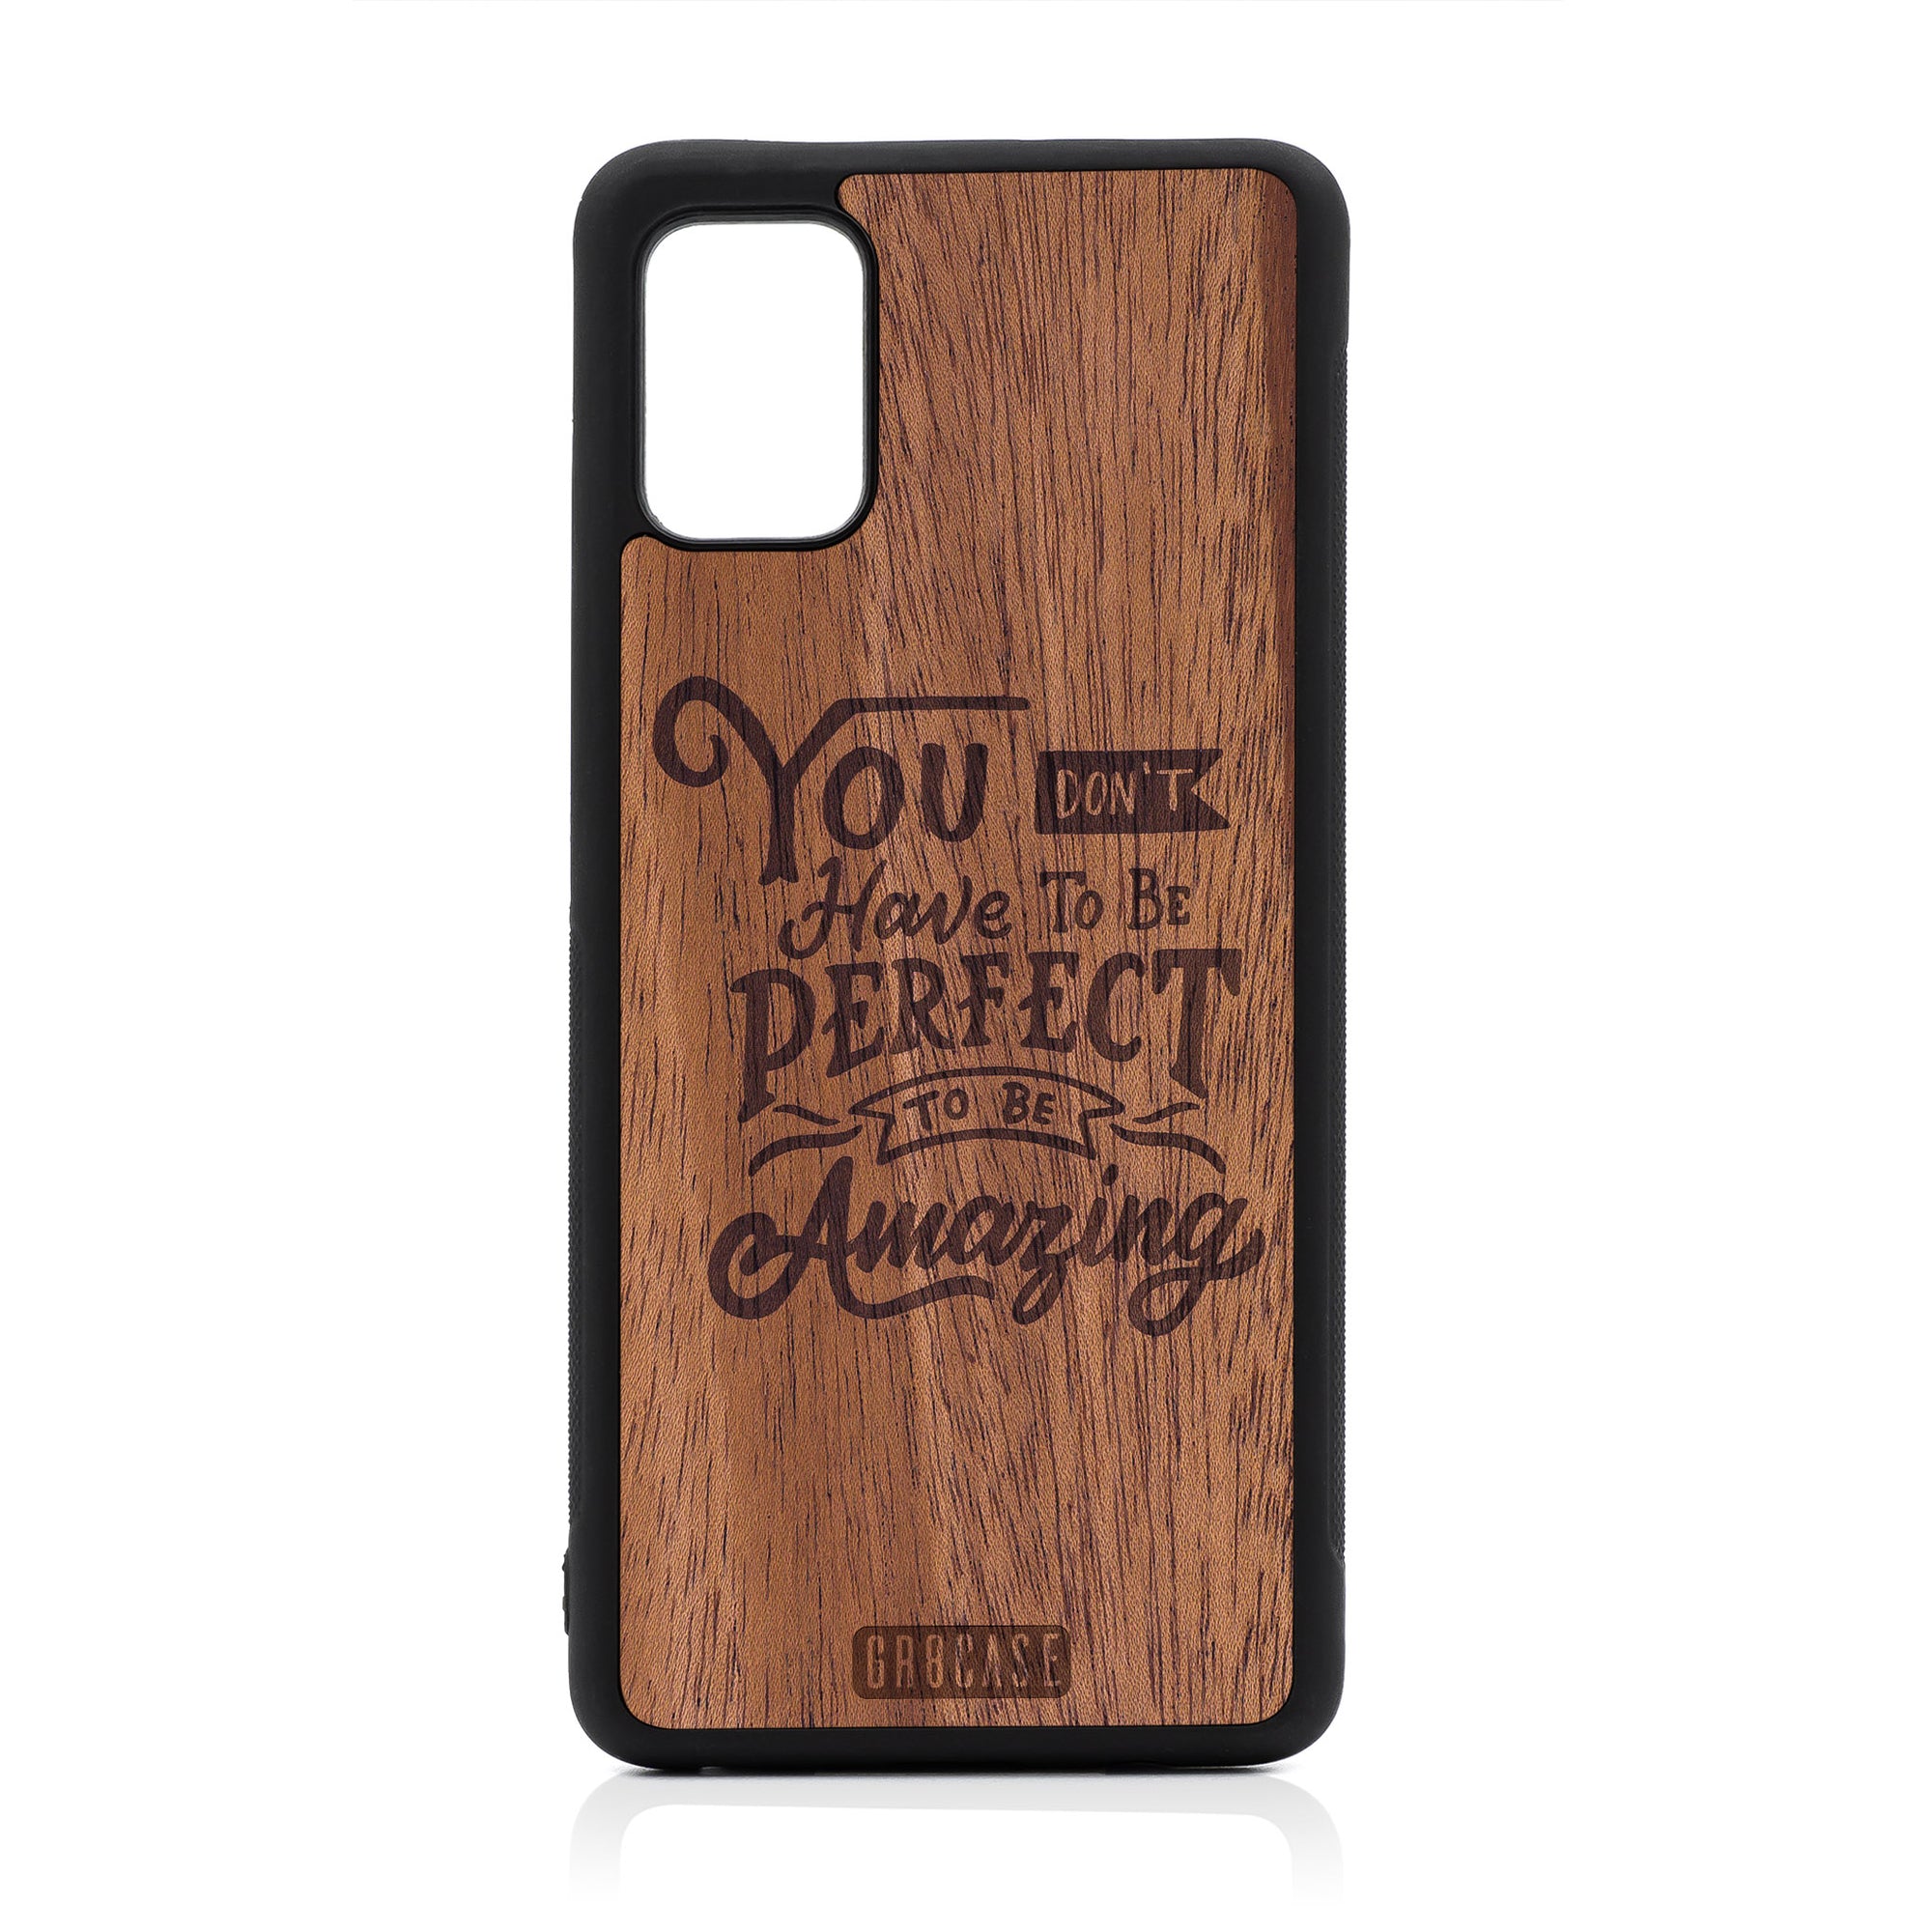 You Don't Have To Be Perfect To Be Amazing Design Wood Case For Samsung Galaxy A51